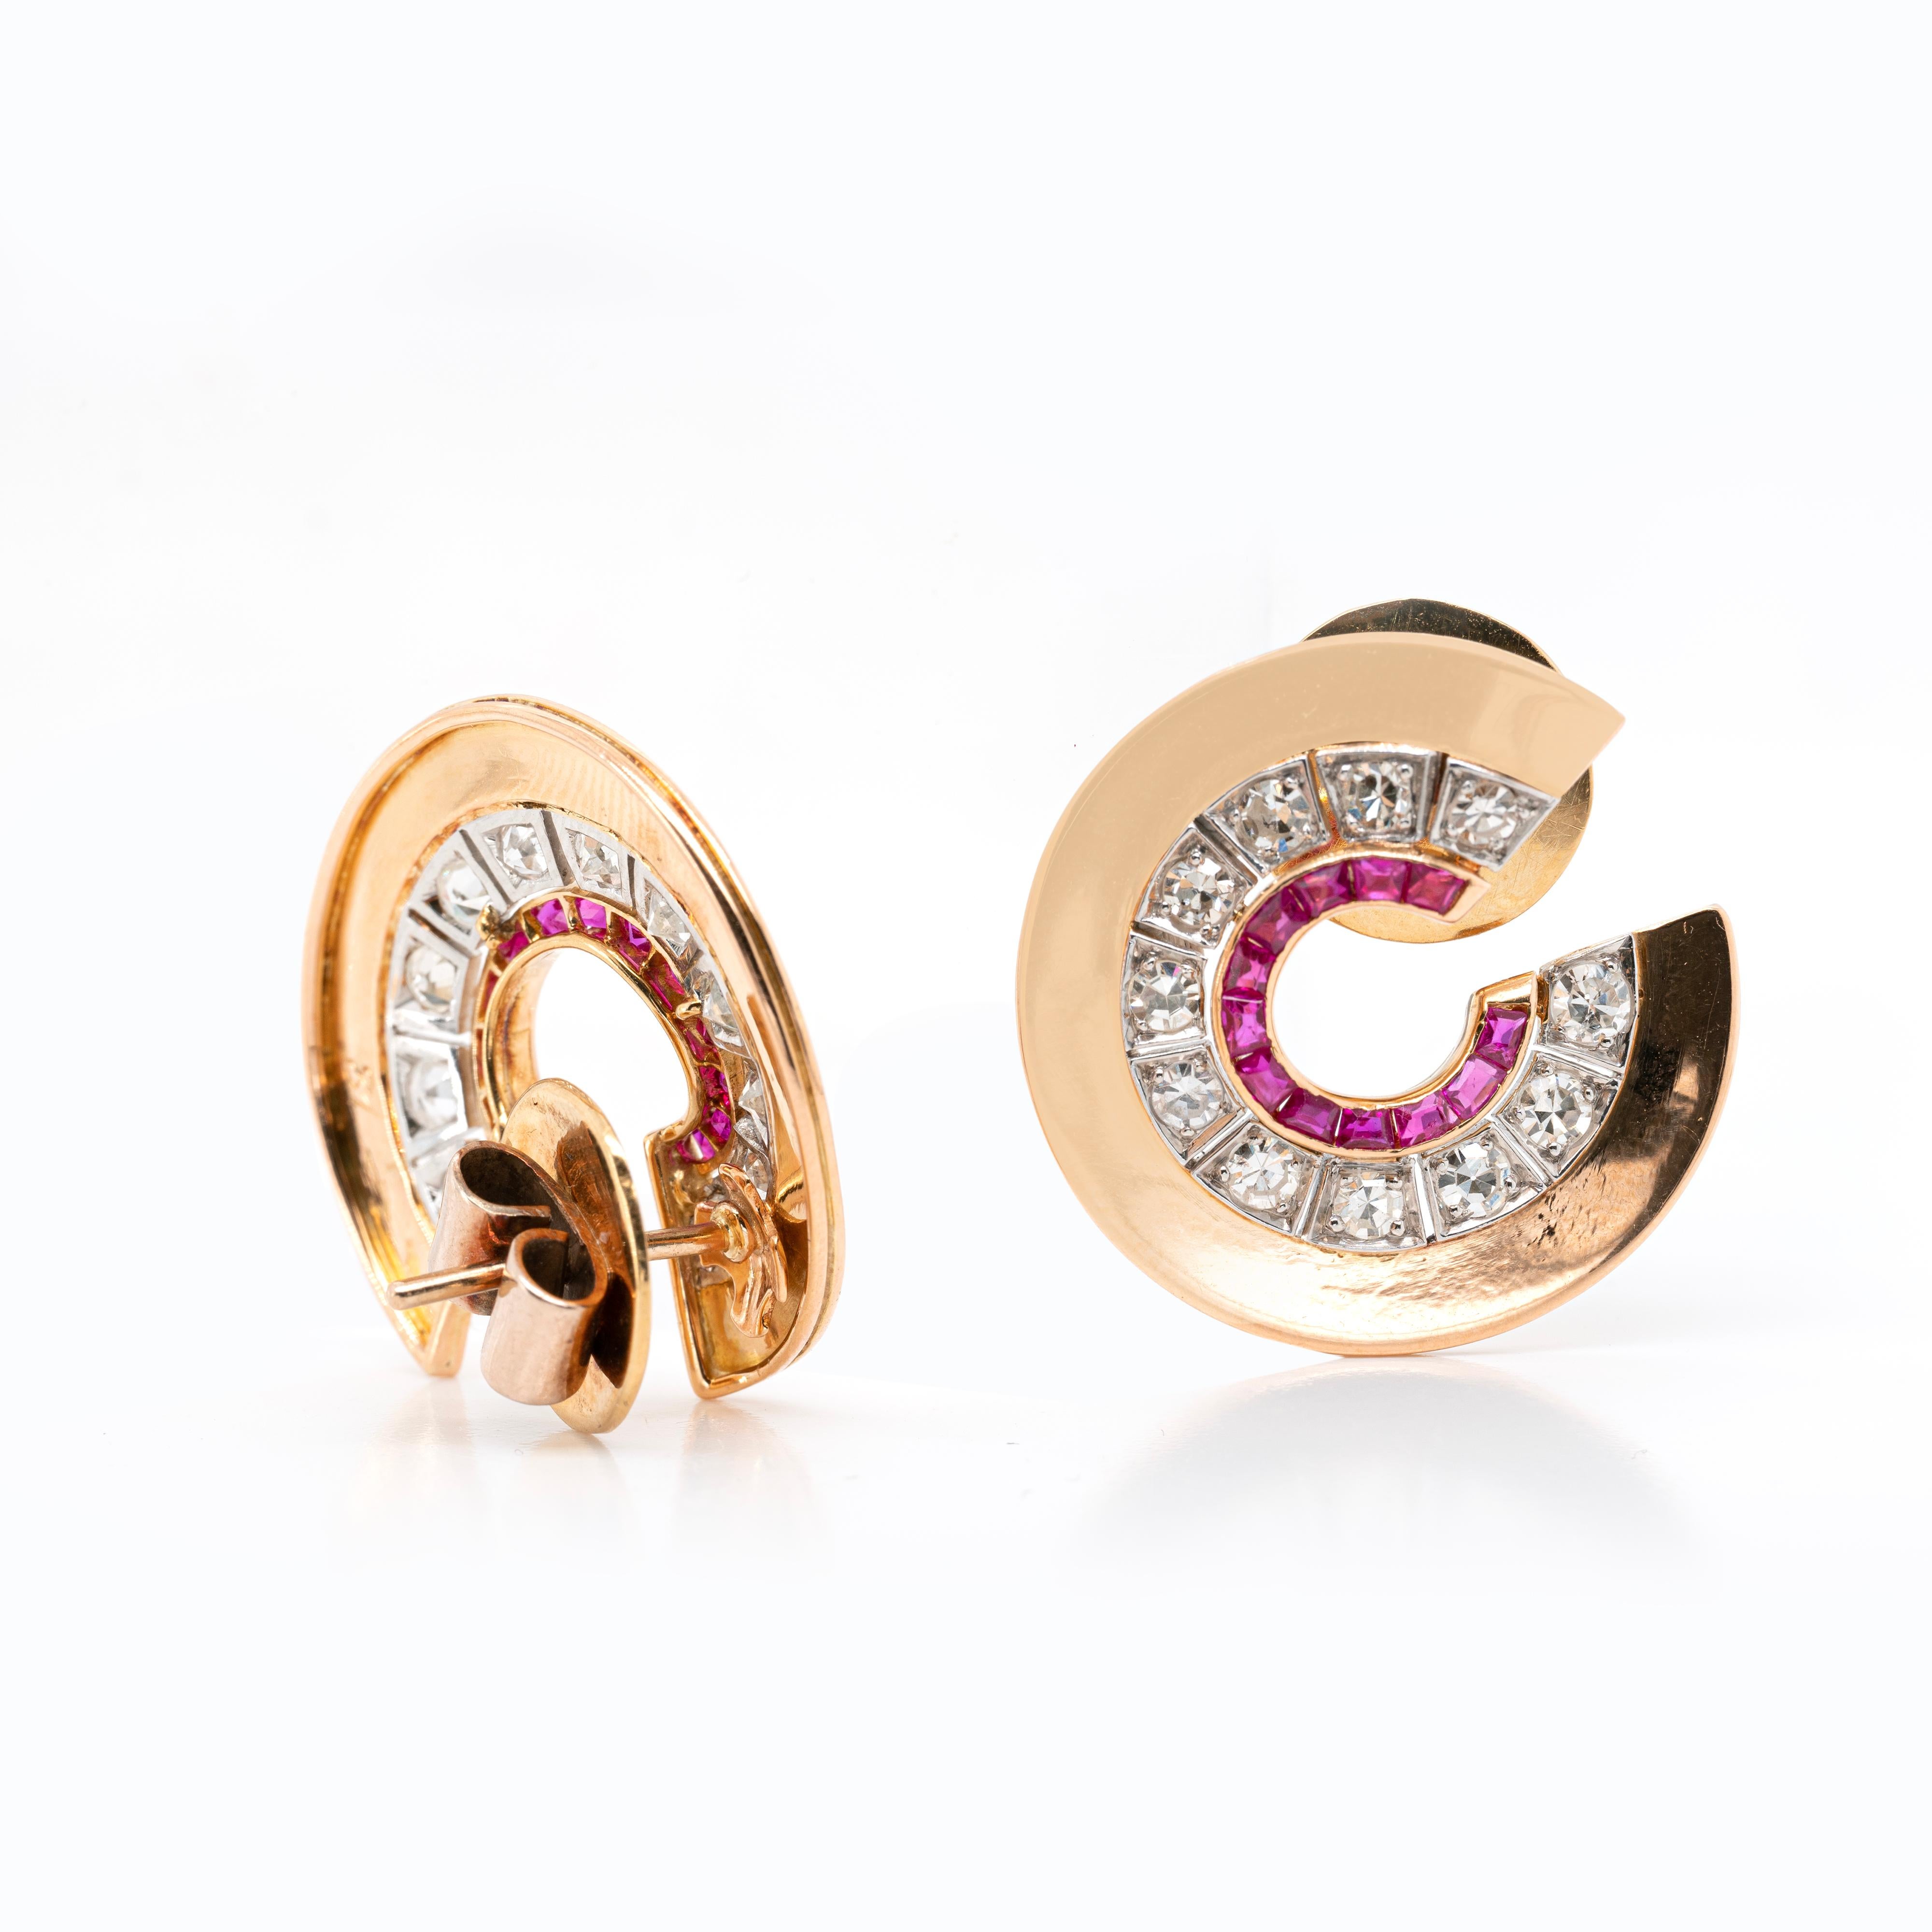 These gorgeous Art Deco inspired stud earrings are masterfully designed as a swirl which beautifully curves around the ear like a half hoop. The inner edge of the earrings is embellished by a row of 12 channel set vibrant rubies weighing